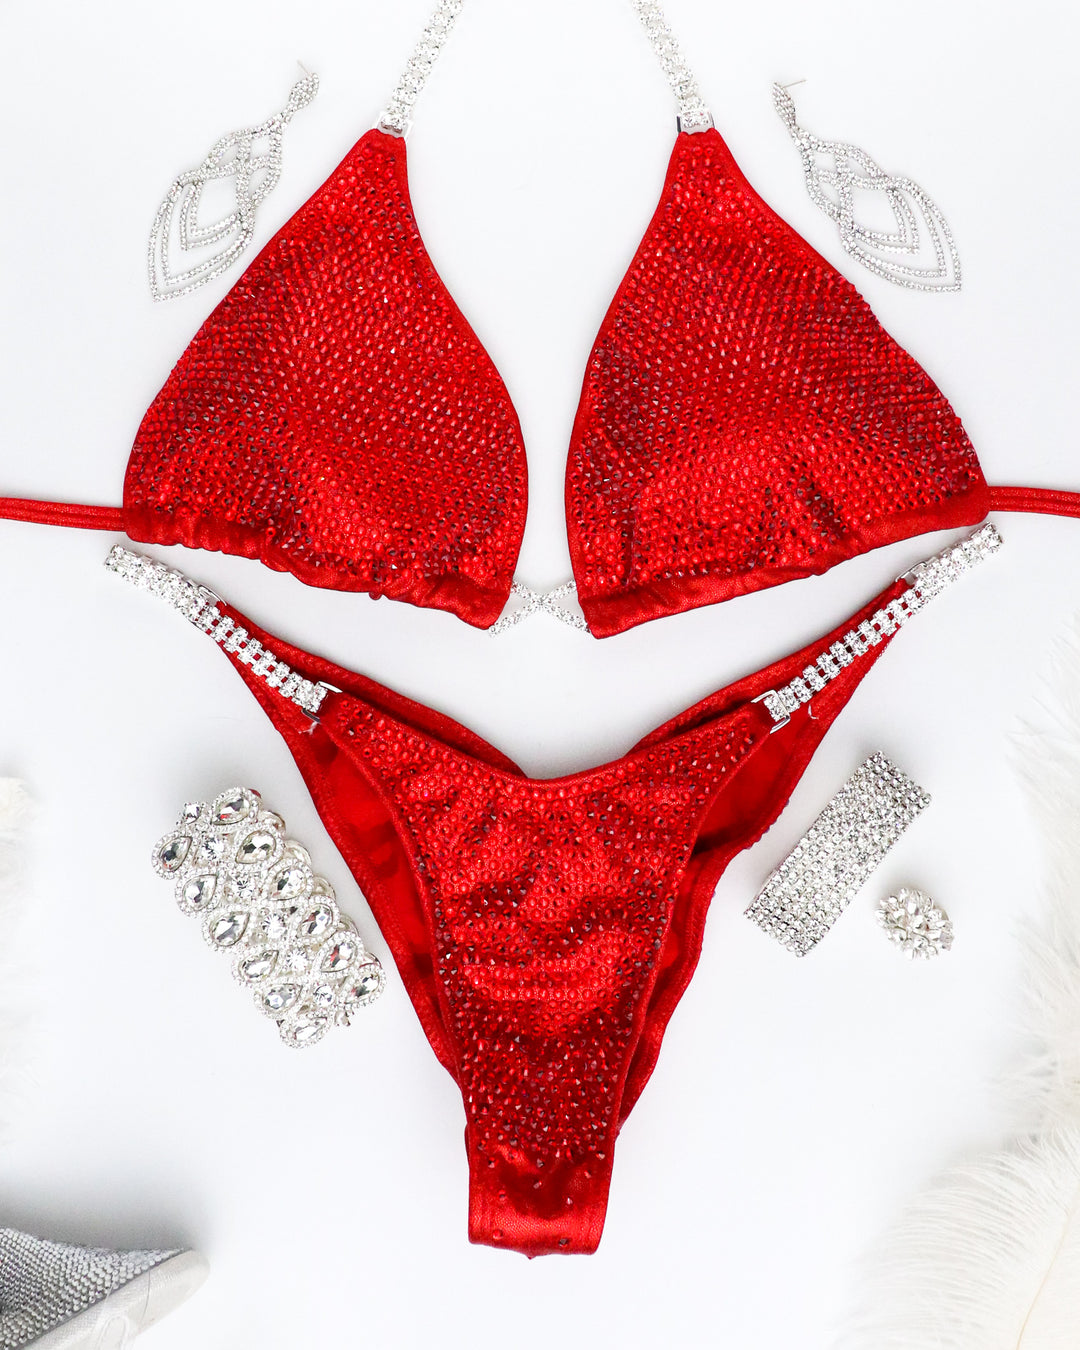 Unleash your power on stage with Red Radiance! 🔥 This striking red competition suit, adorned with dazzling Light Siam crystals, is a bold statement of strength and style. Stand out and own the spotlight! 💃 #RedRadiance #Bodybuilding #CompetitionReady 🏆